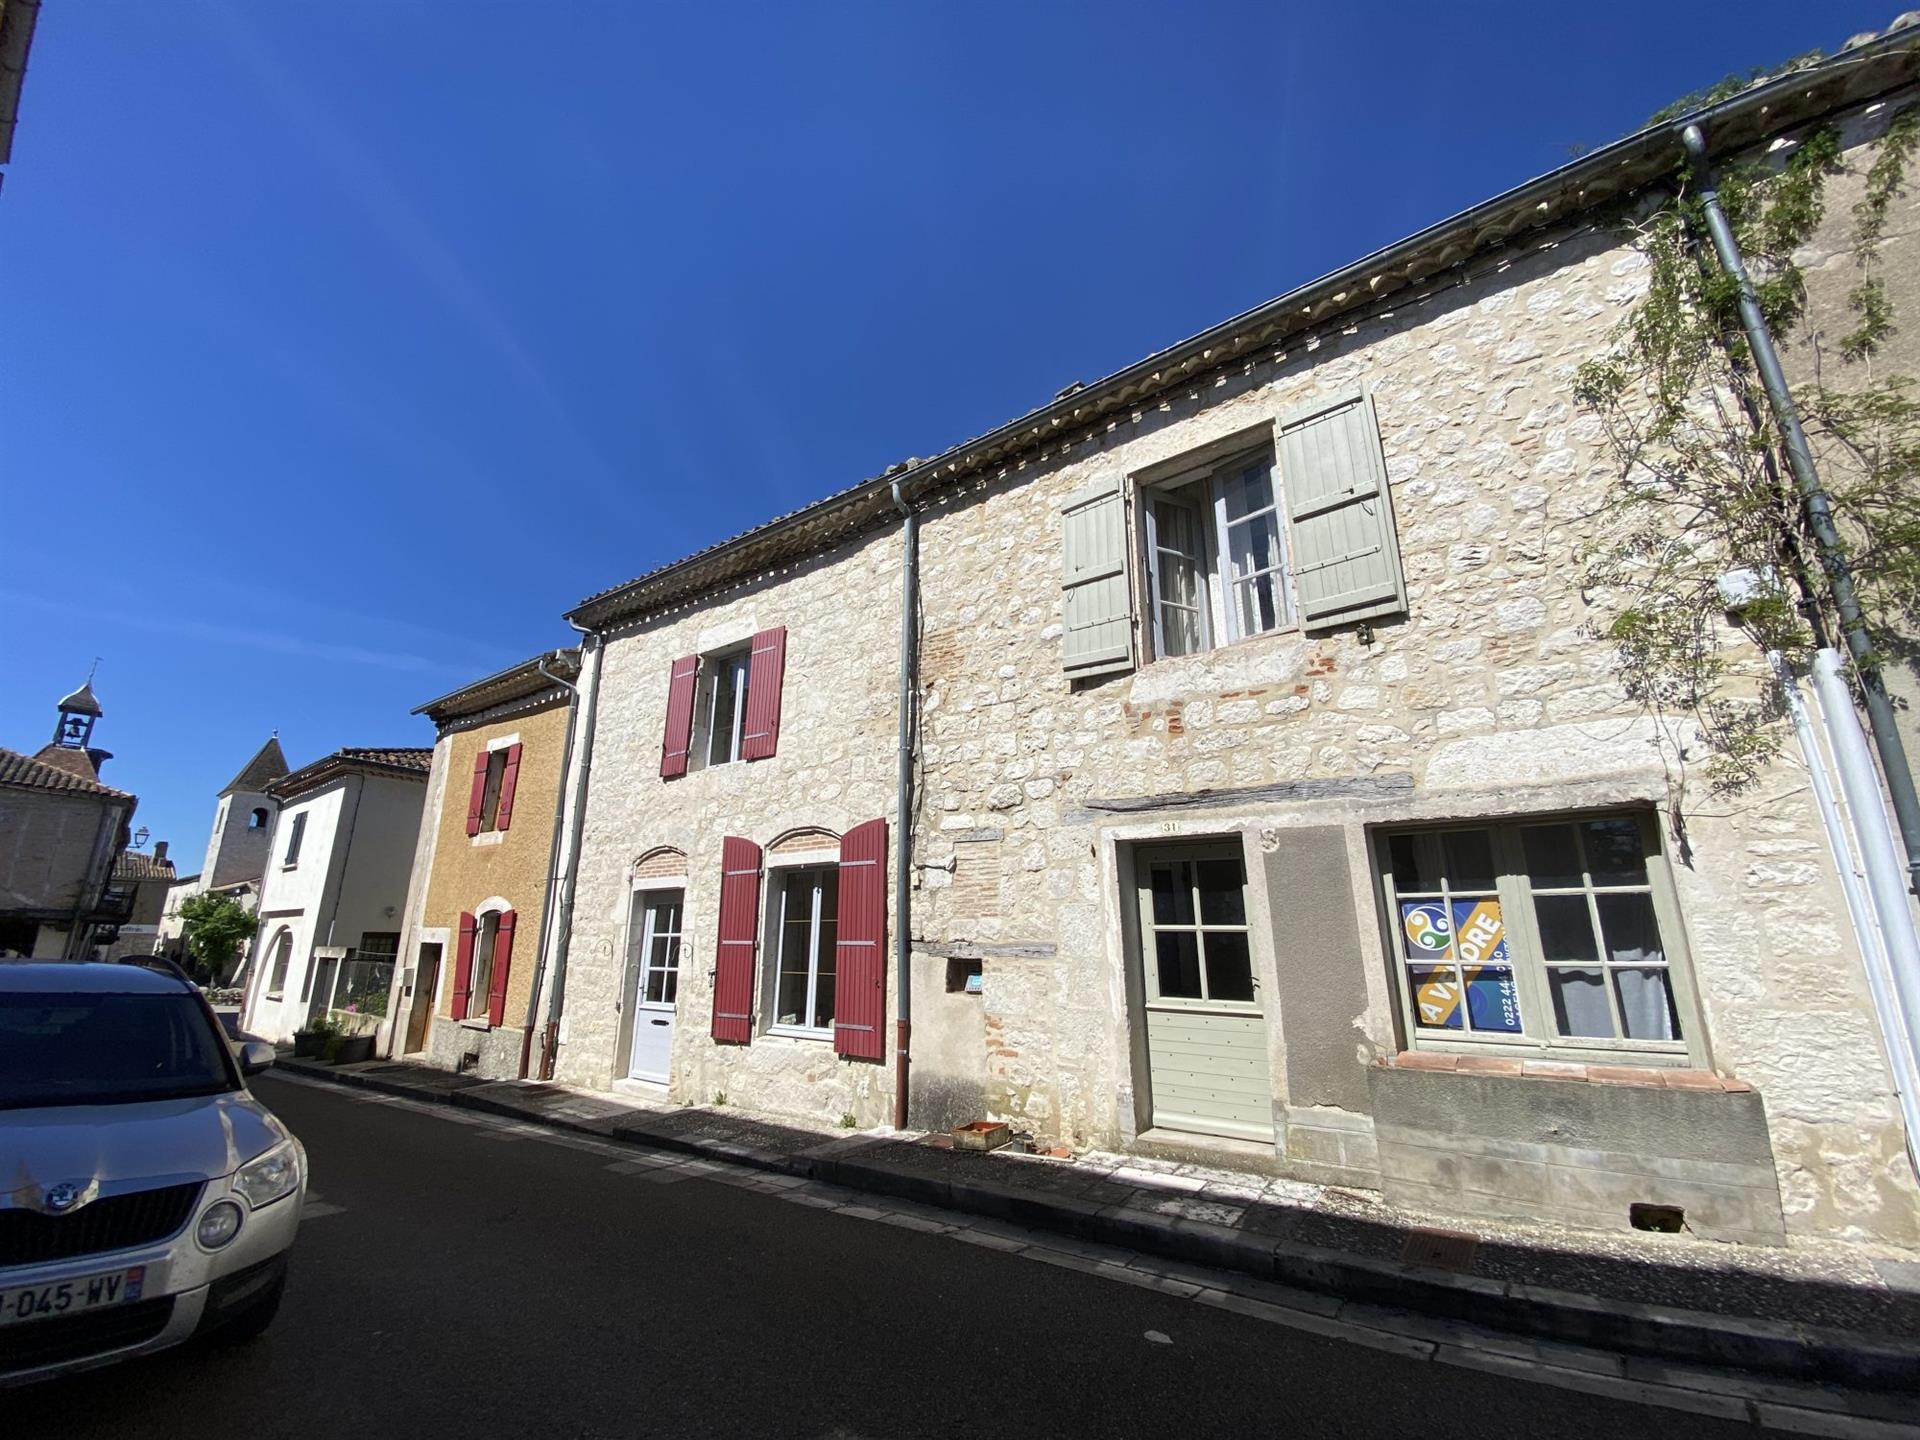  Lot Et Garonne Historic village house with 3 beds, stones throw from main square